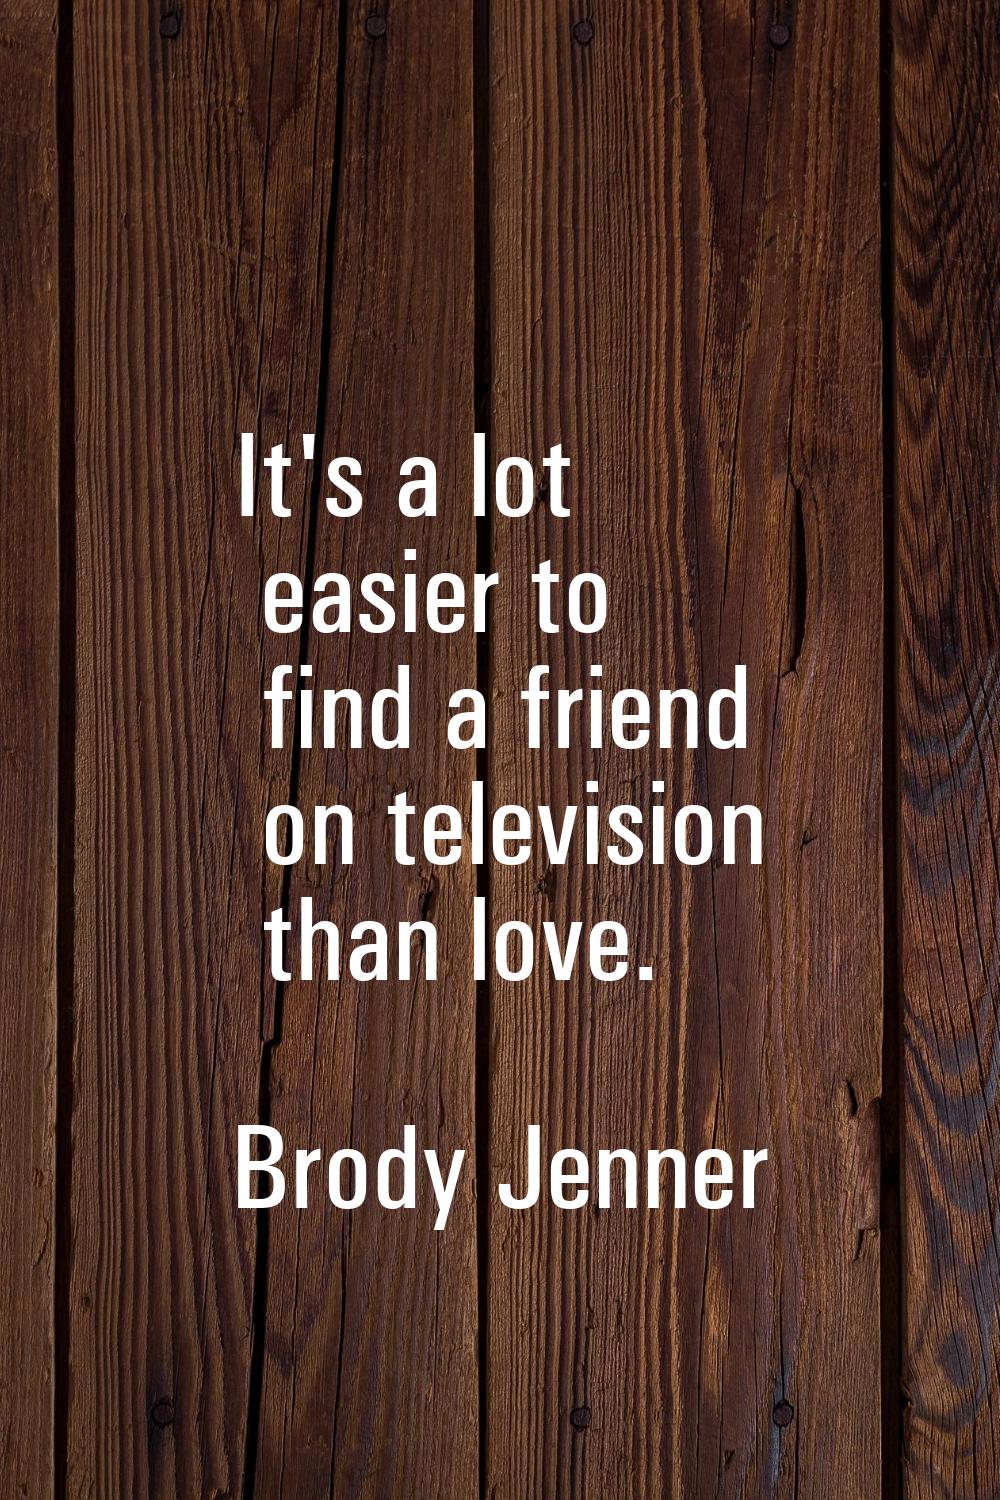 It's a lot easier to find a friend on television than love.